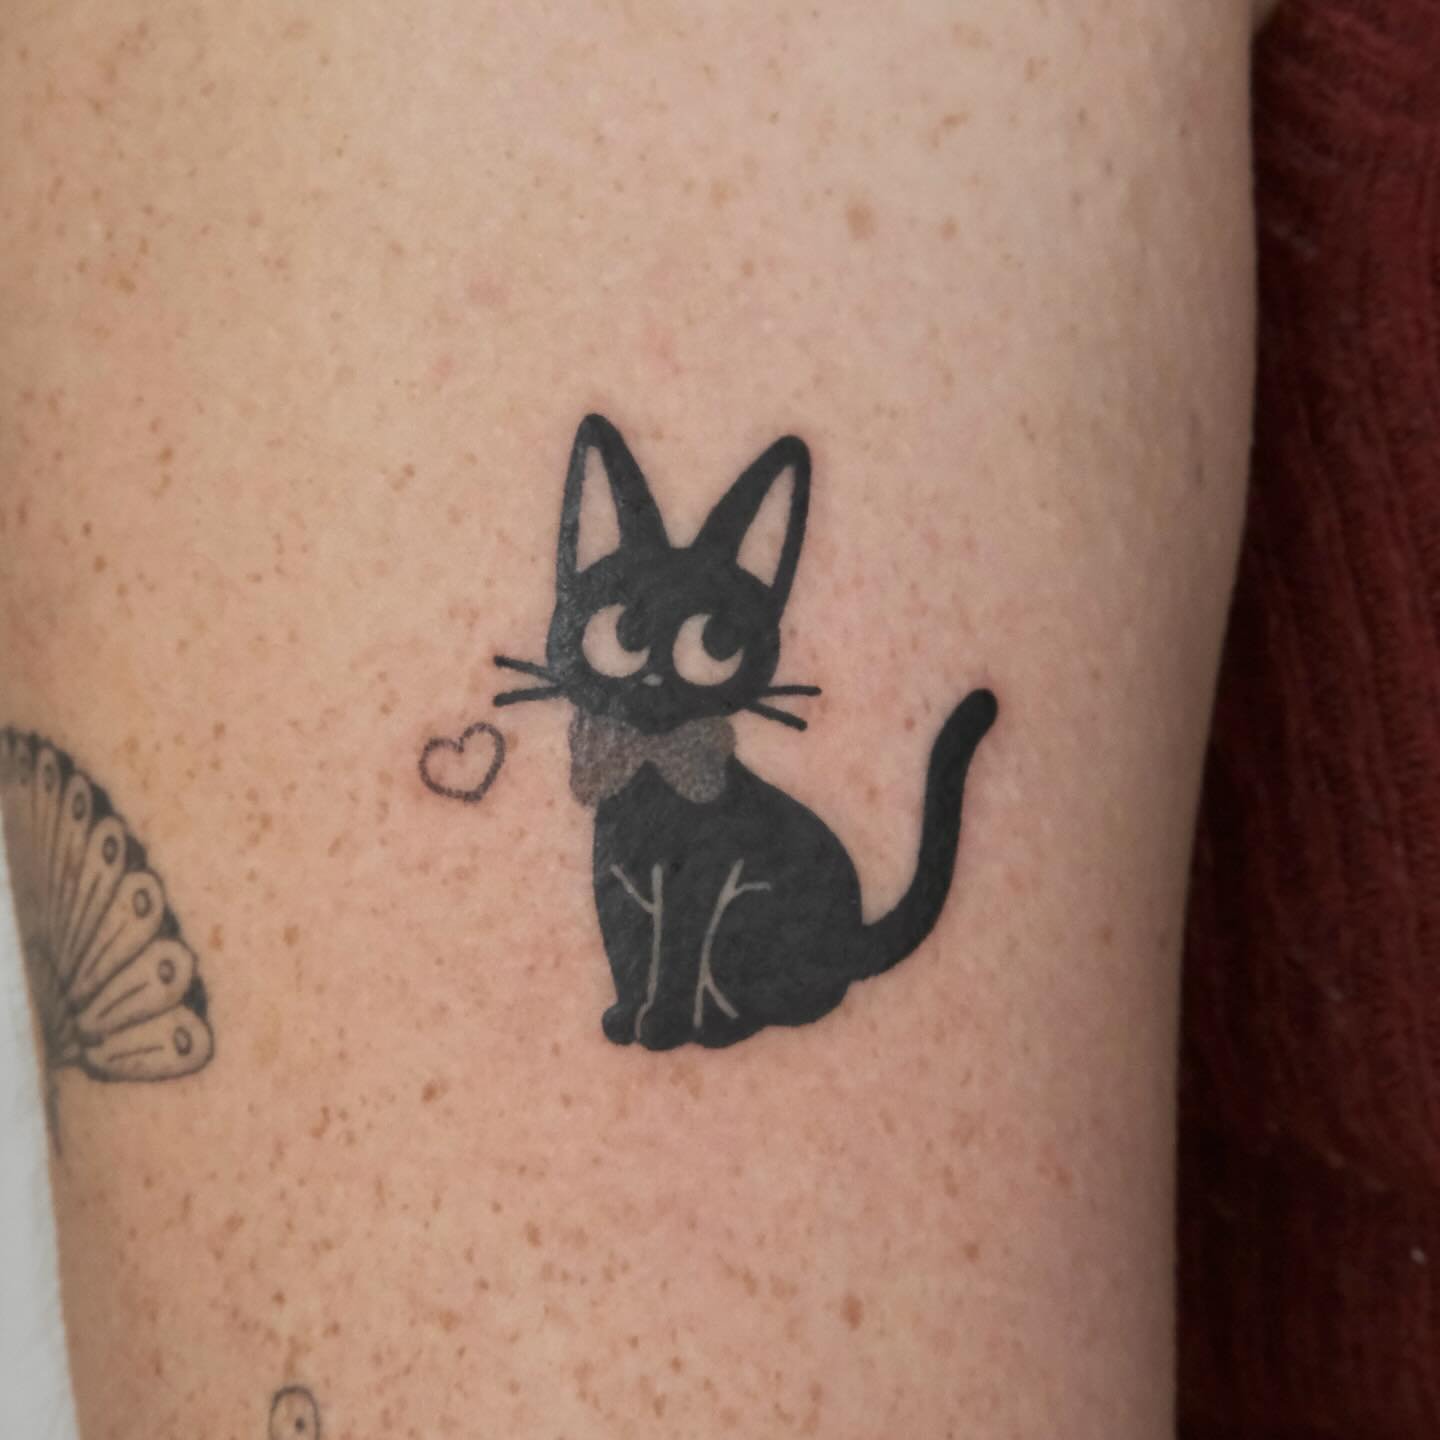 a cute little jiji the cat for jess! thank you for picking from my kiki&rsquo;s delivery service themed flash sheet 🧹&hearts;️🐈&zwj;⬛ 

books open! if you like this tattoo i&rsquo;m more than happy to design a similar custom one for you 😚🫶 

ᯓ★

